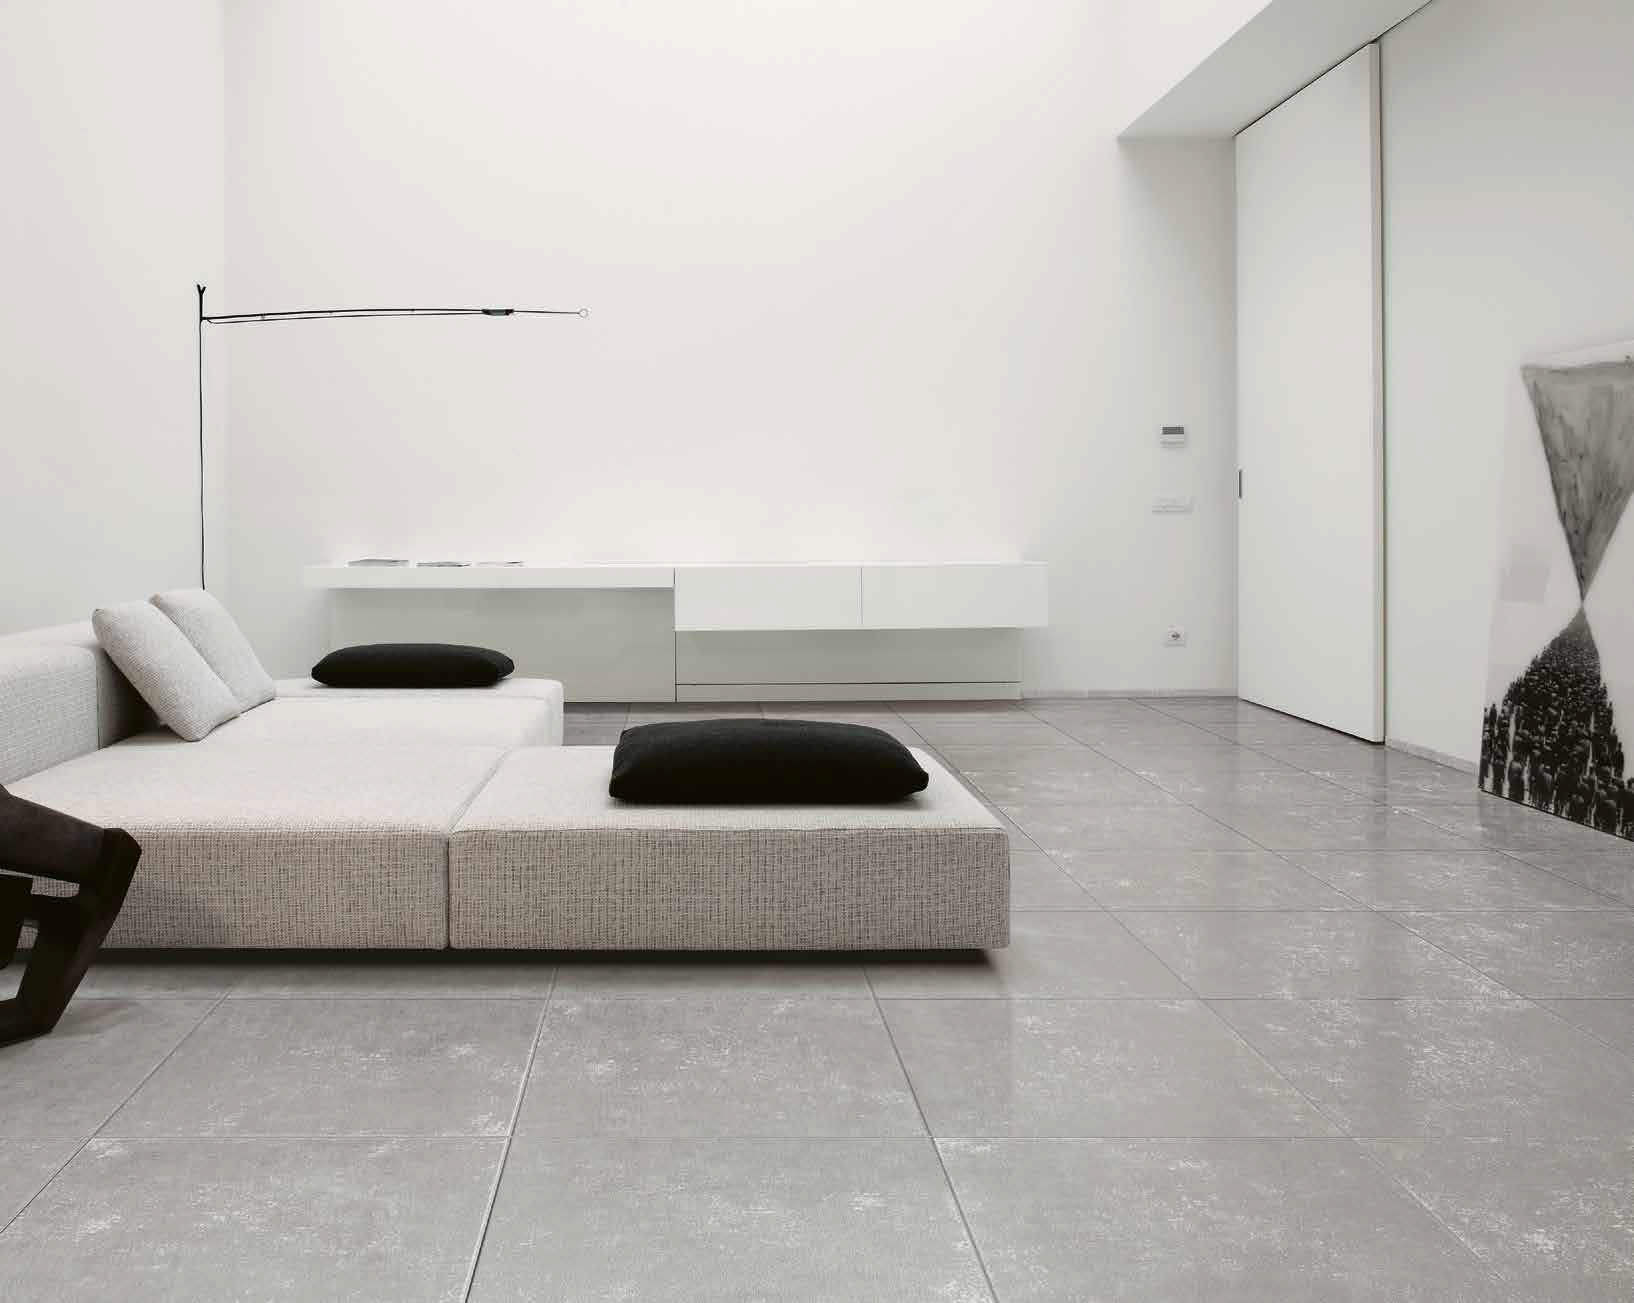 Kalos tile has modern and industrial stone effect design with different sizes and natural colors.